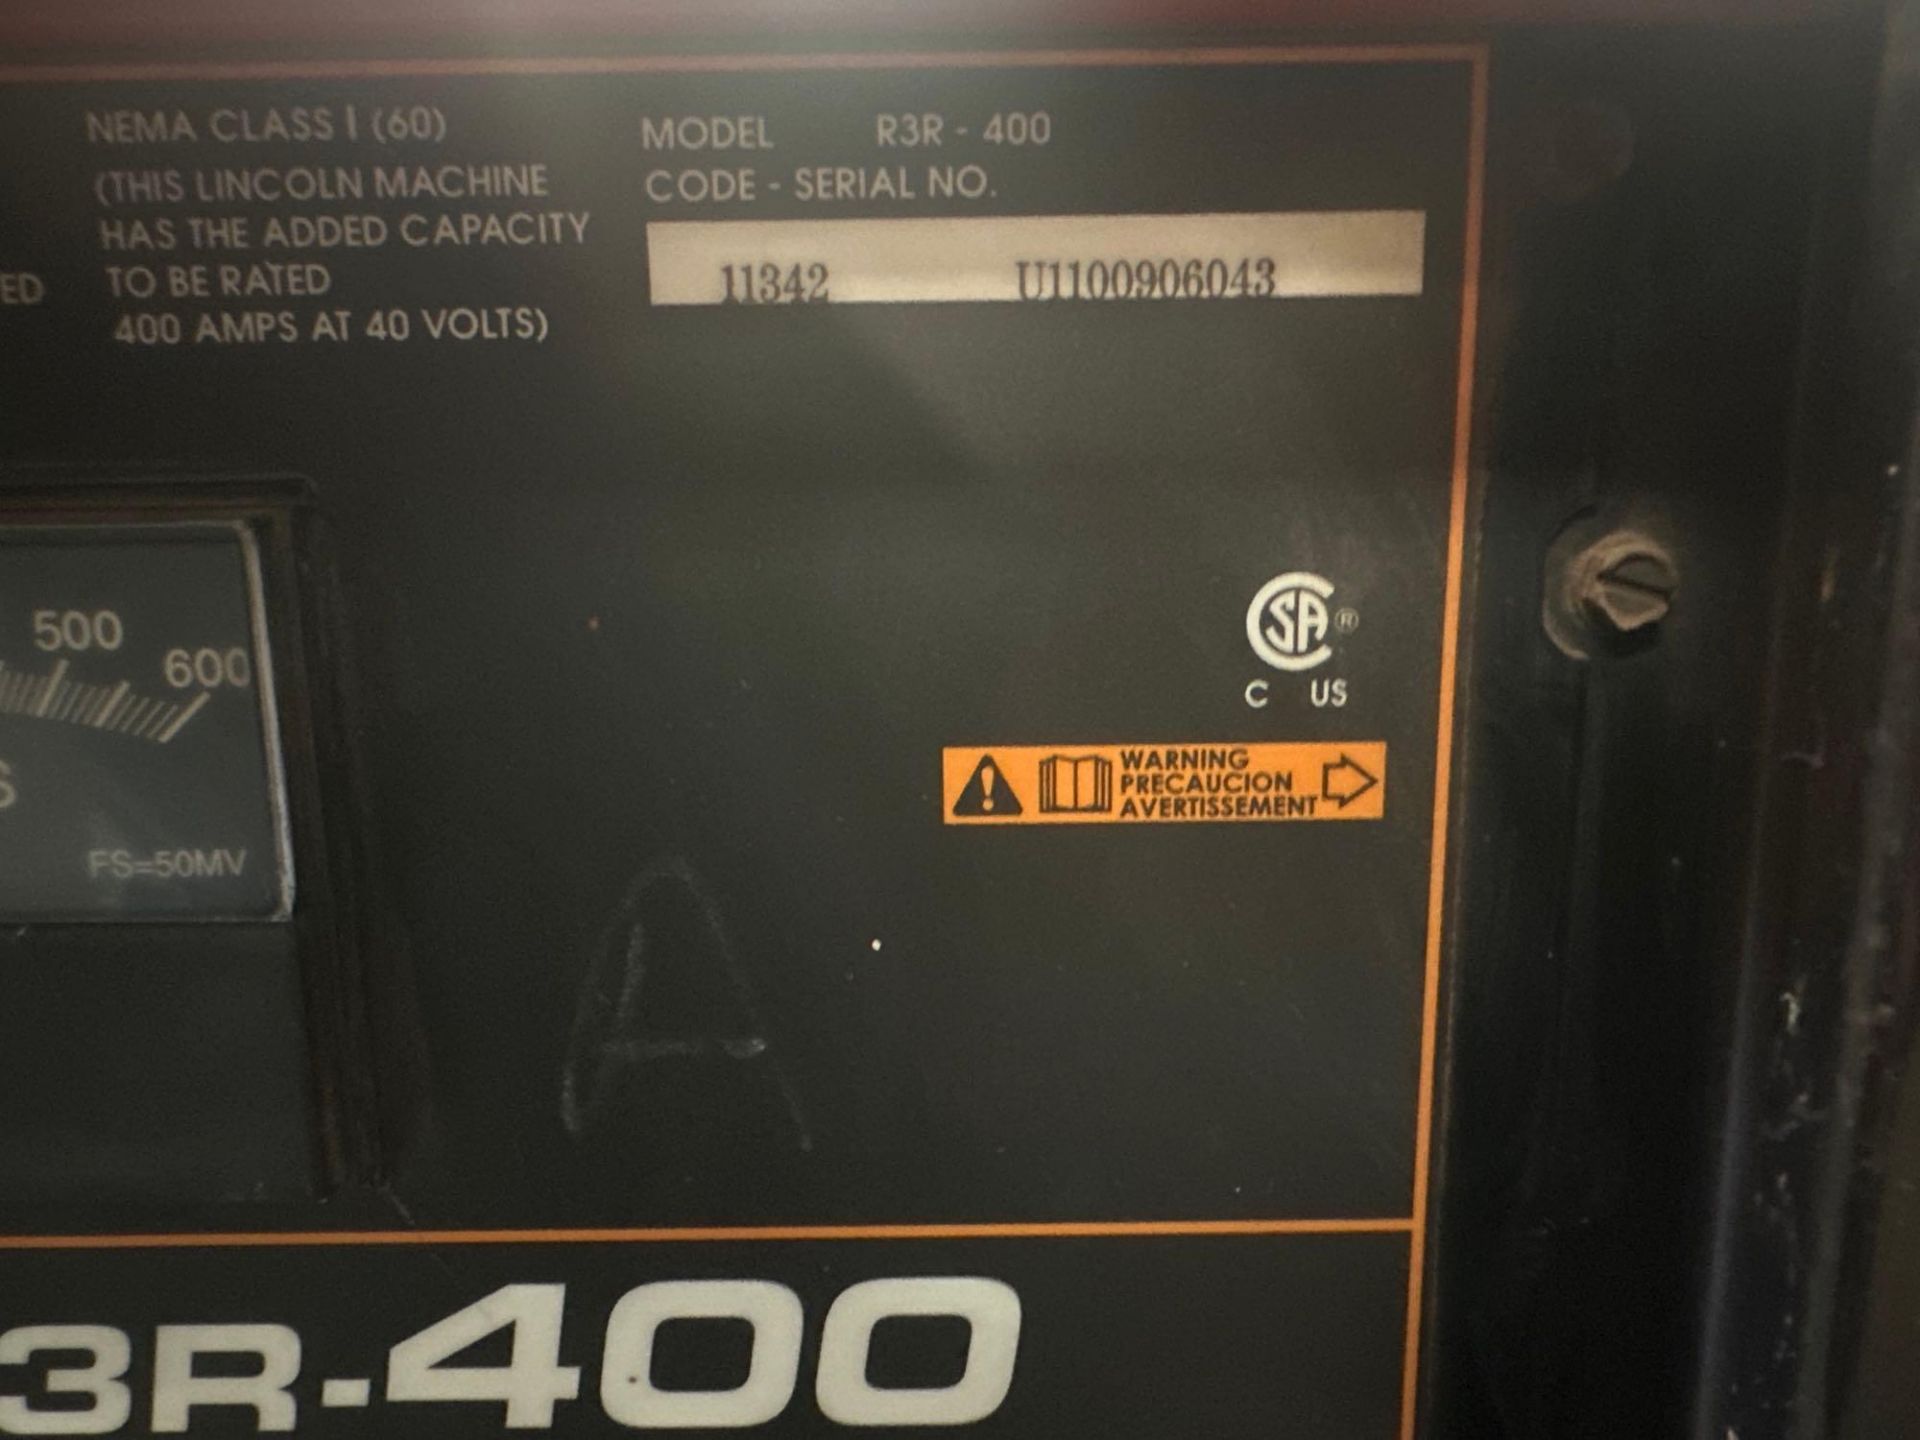 Lincoln Electric Idealarc R3R-400 Welder, s/n U1100906043 *Located in Redlands, CA* - Image 6 of 8